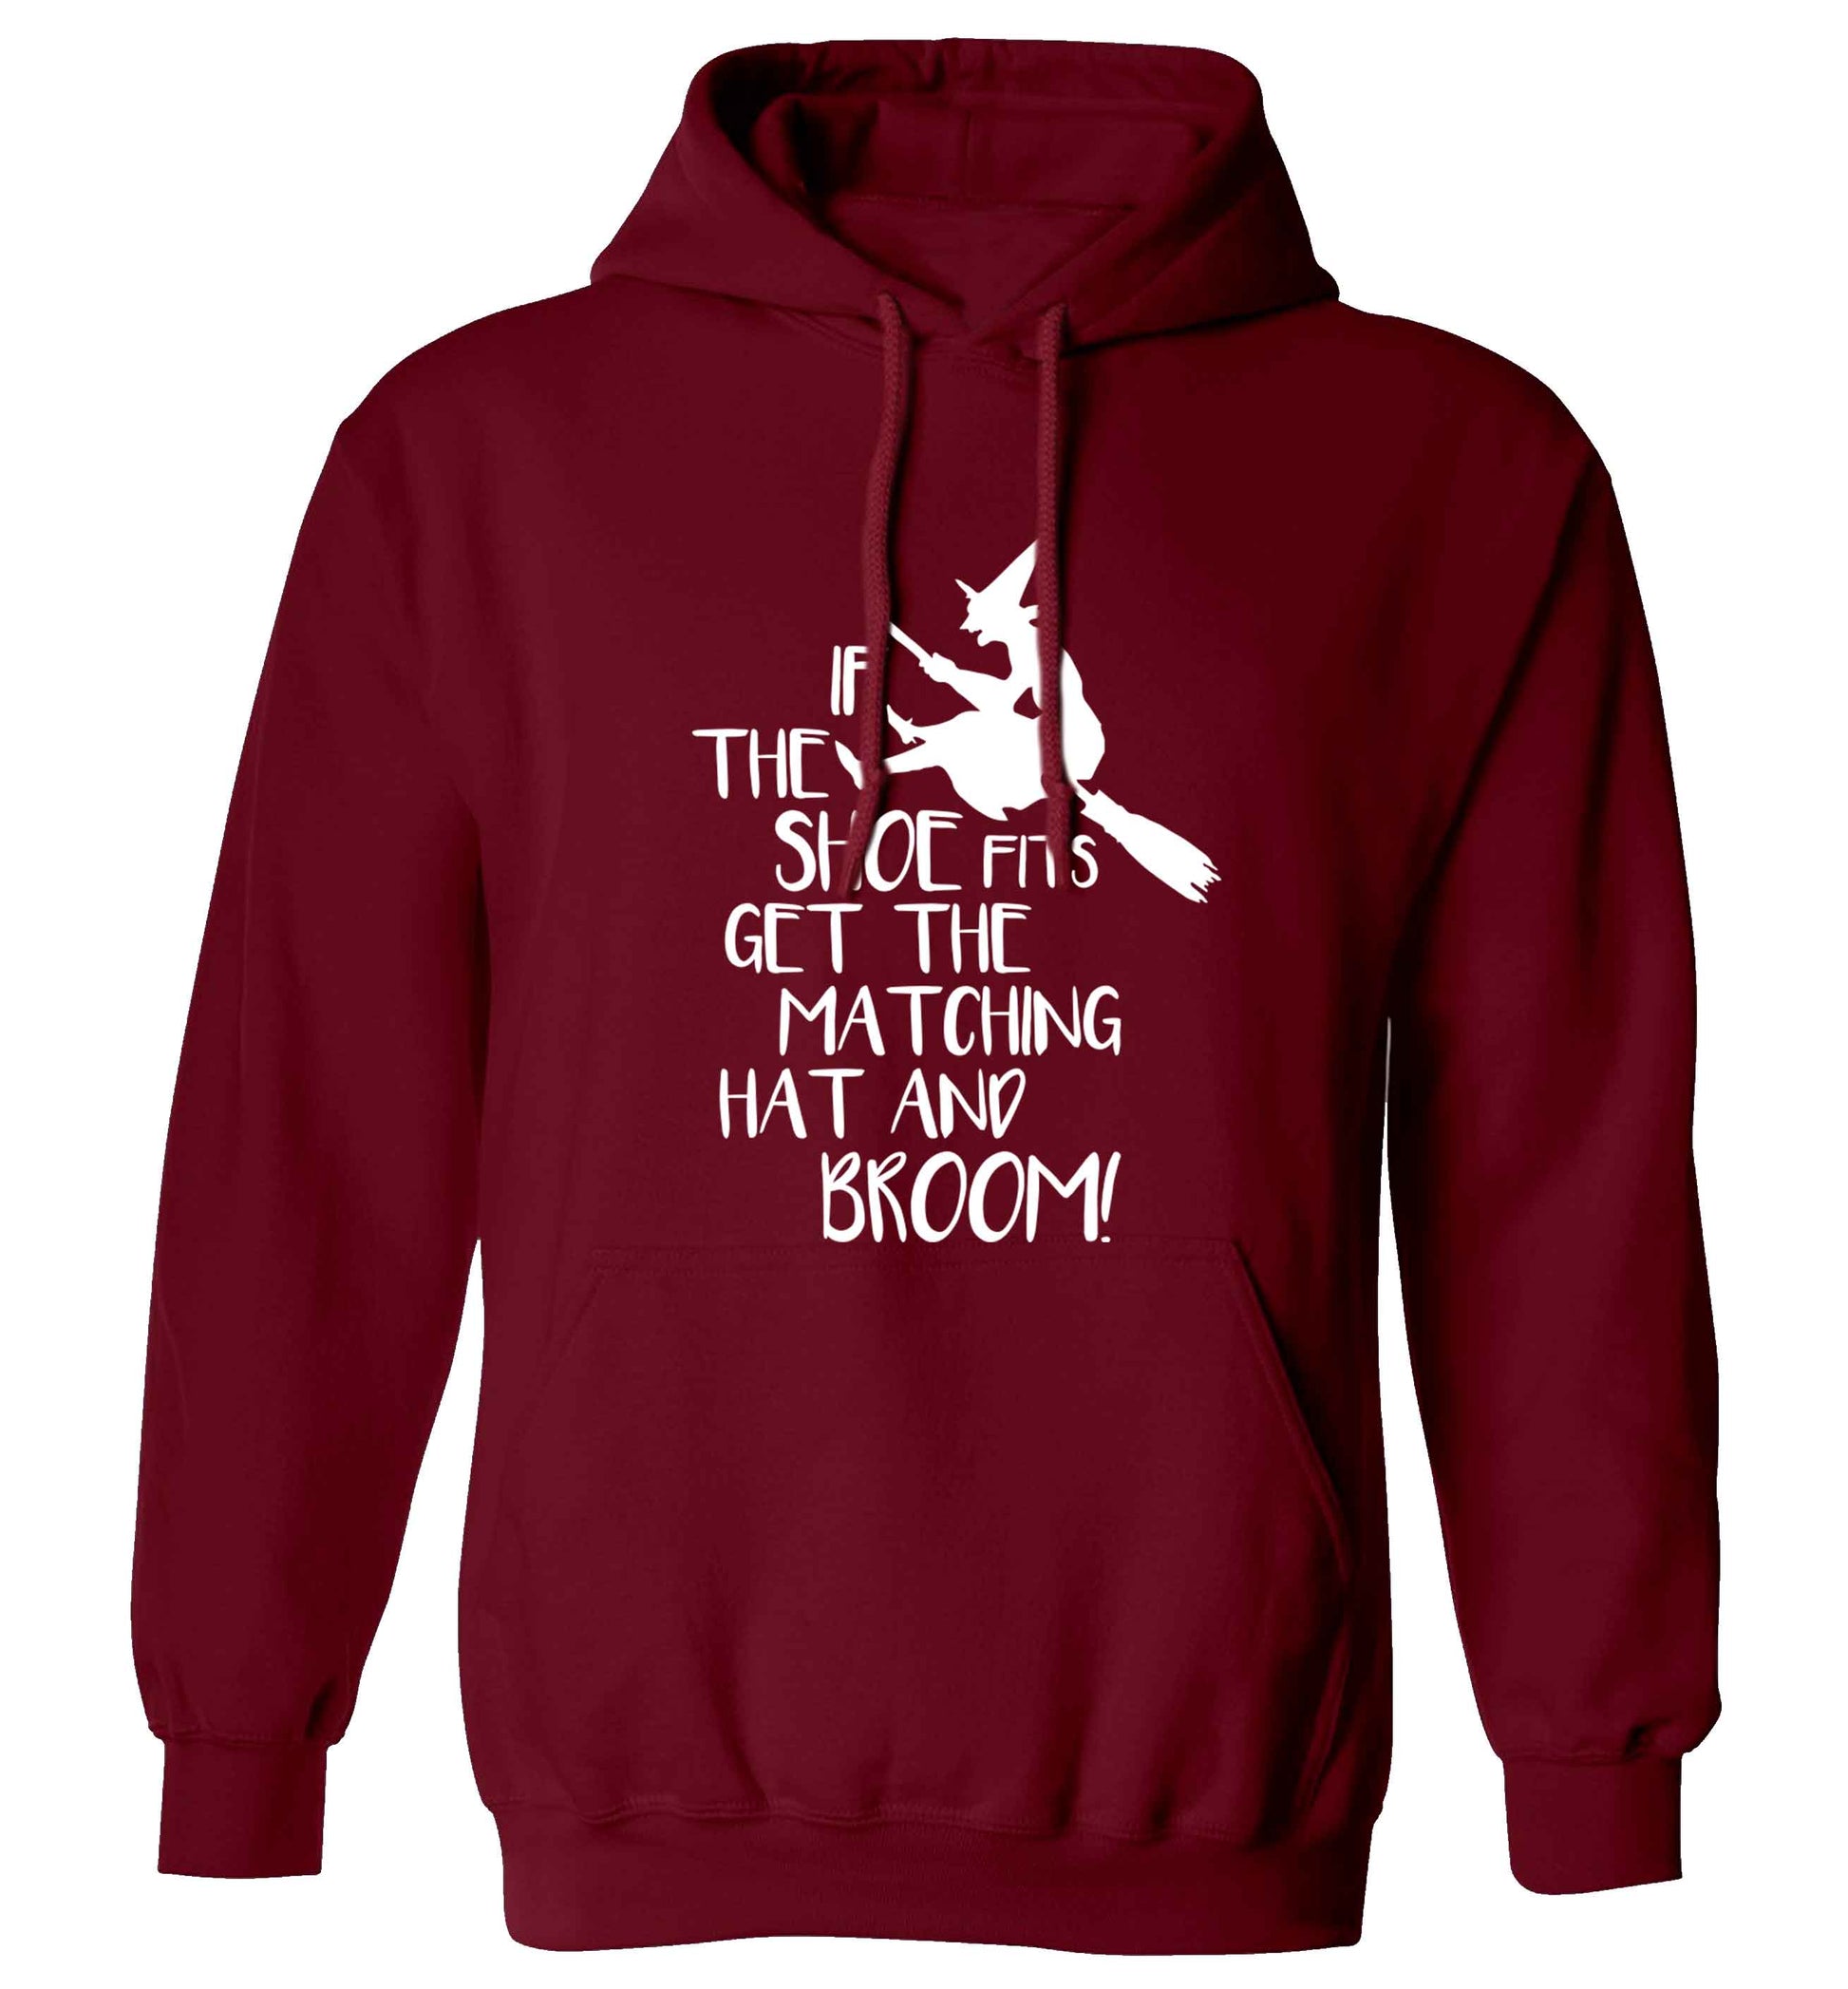 If the shoe fits get the matching hat and broom adults unisex maroon hoodie 2XL